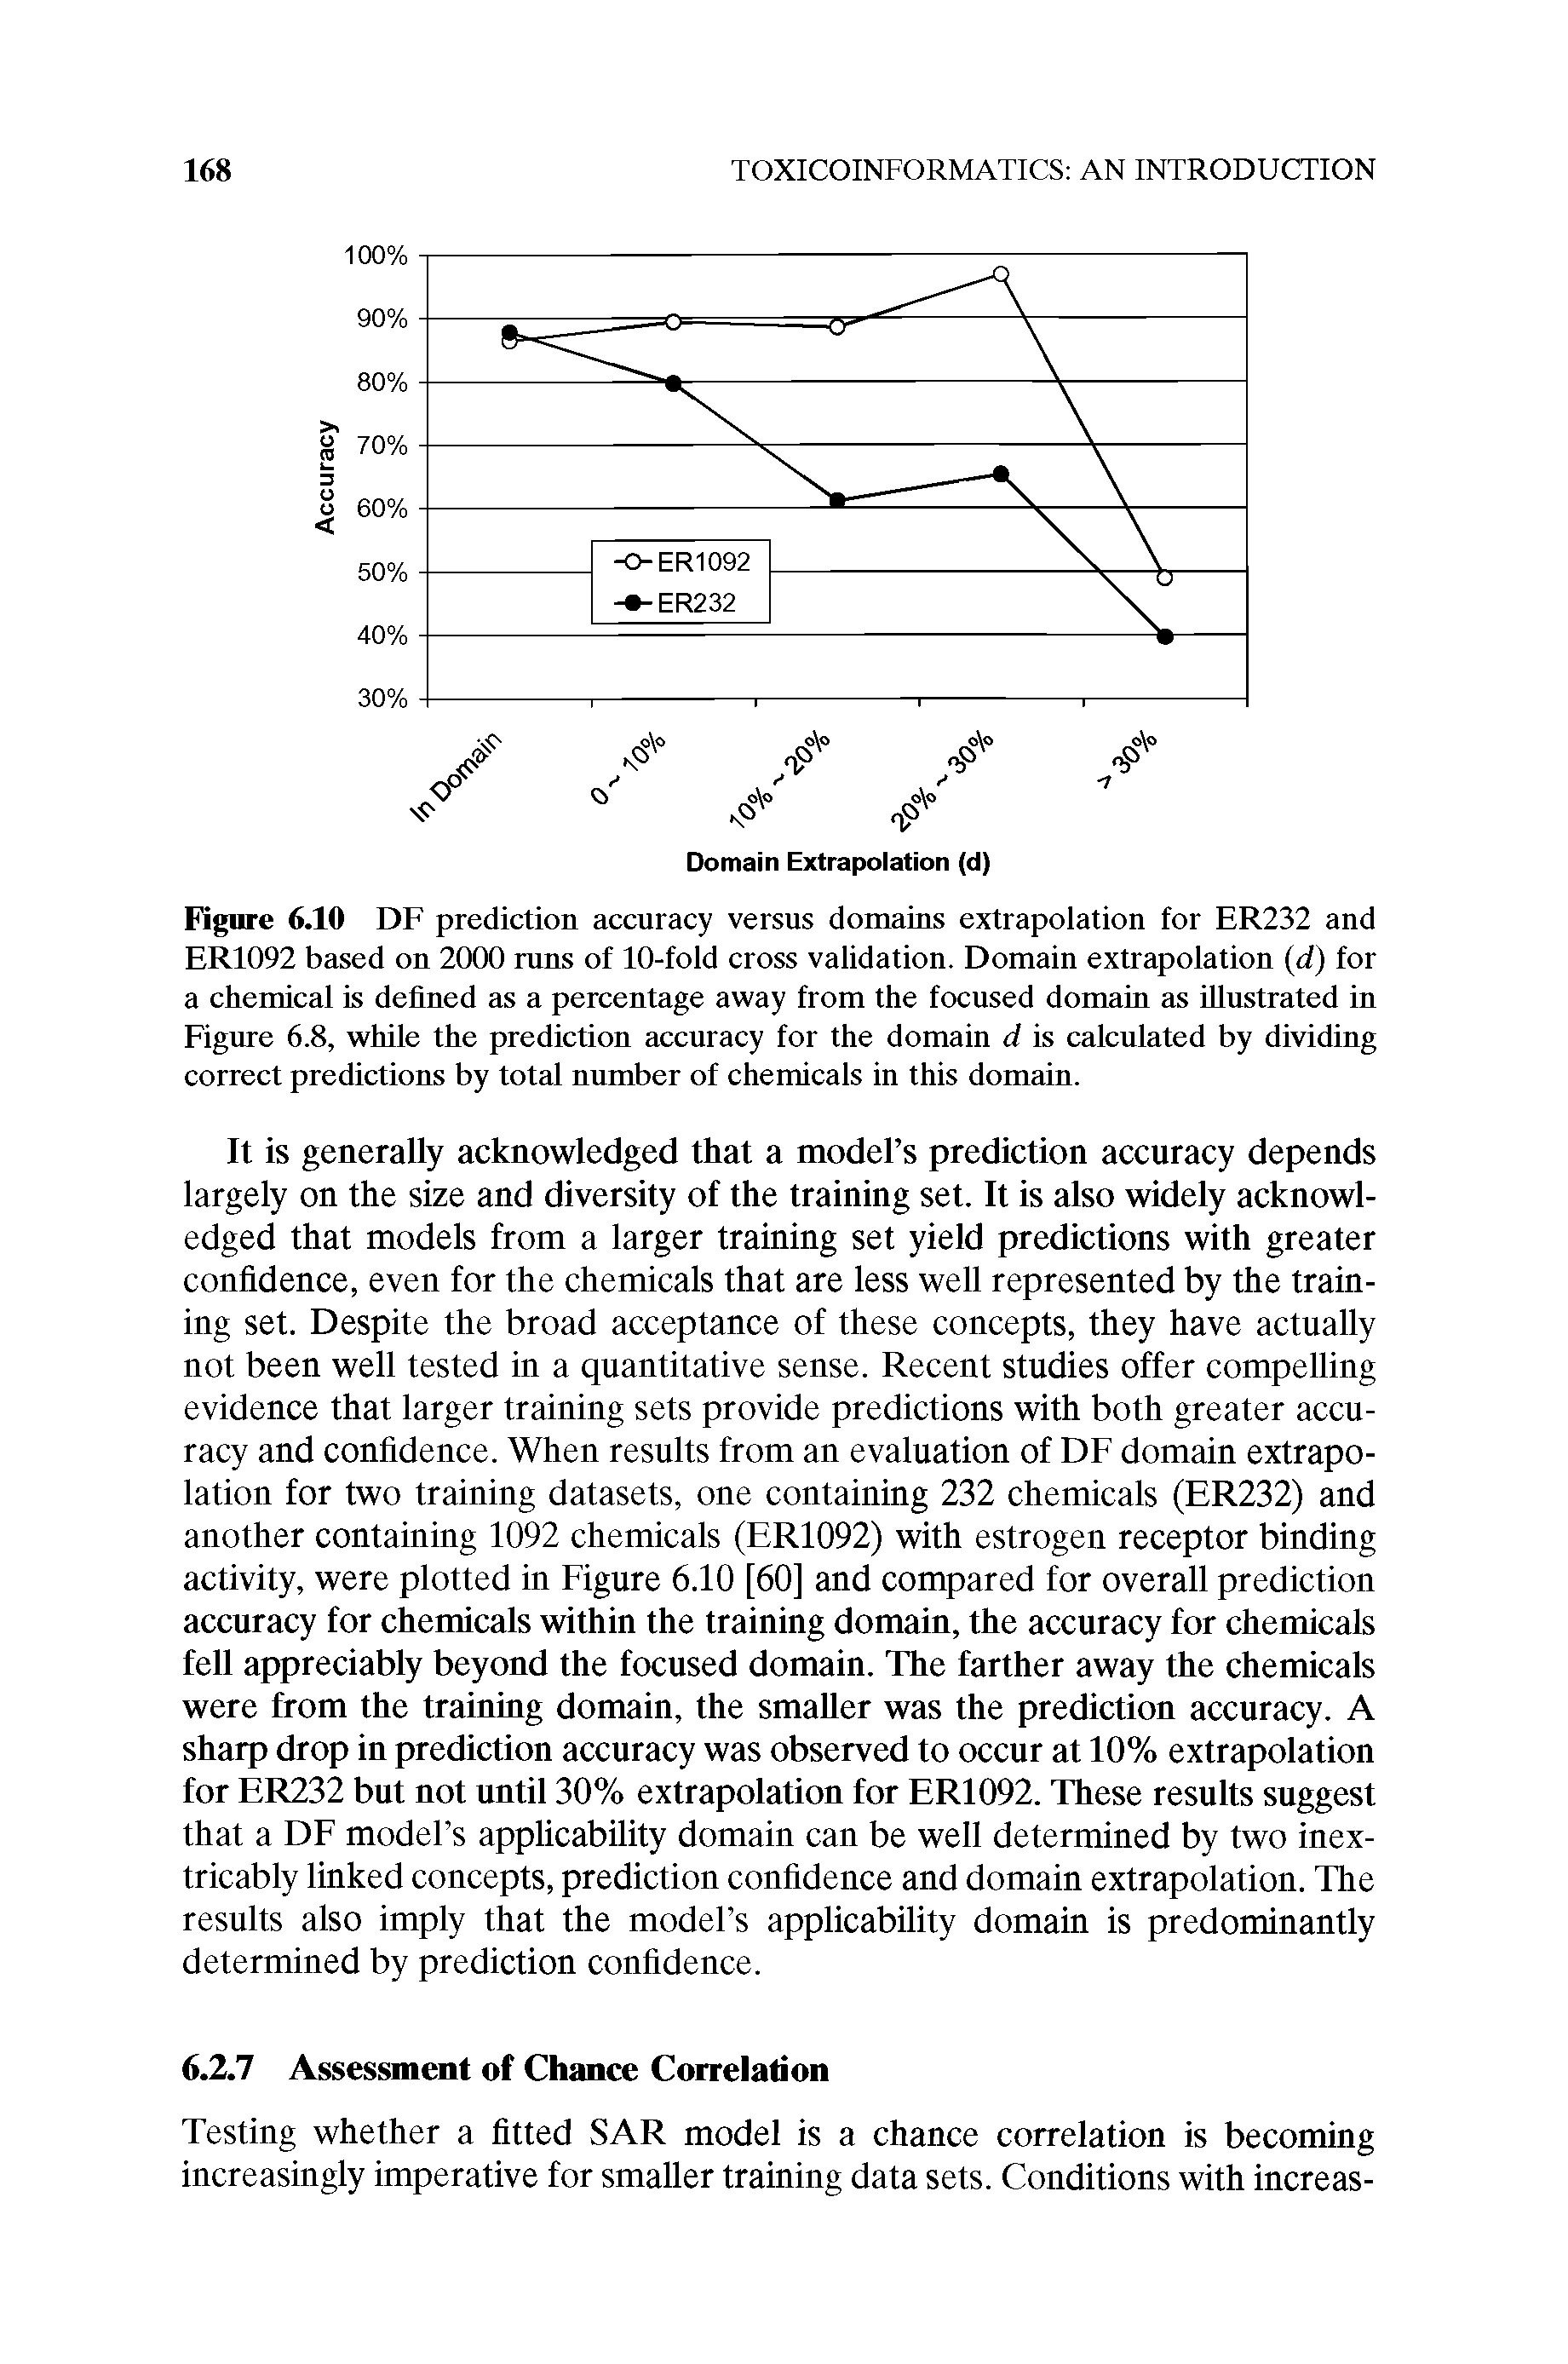 Figure 6.10 DF prediction accuracy versus domains extrapolation for ER232 and ER1092 based on 2000 runs of 10-fold cross validation. Domain extrapolation (d) for a chemical is defined as a percentage away from the focused domain as illustrated in Figure 6.8, while the prediction accuracy for the domain d is calculated by dividing correct predictions by total number of chemicals in this domain.